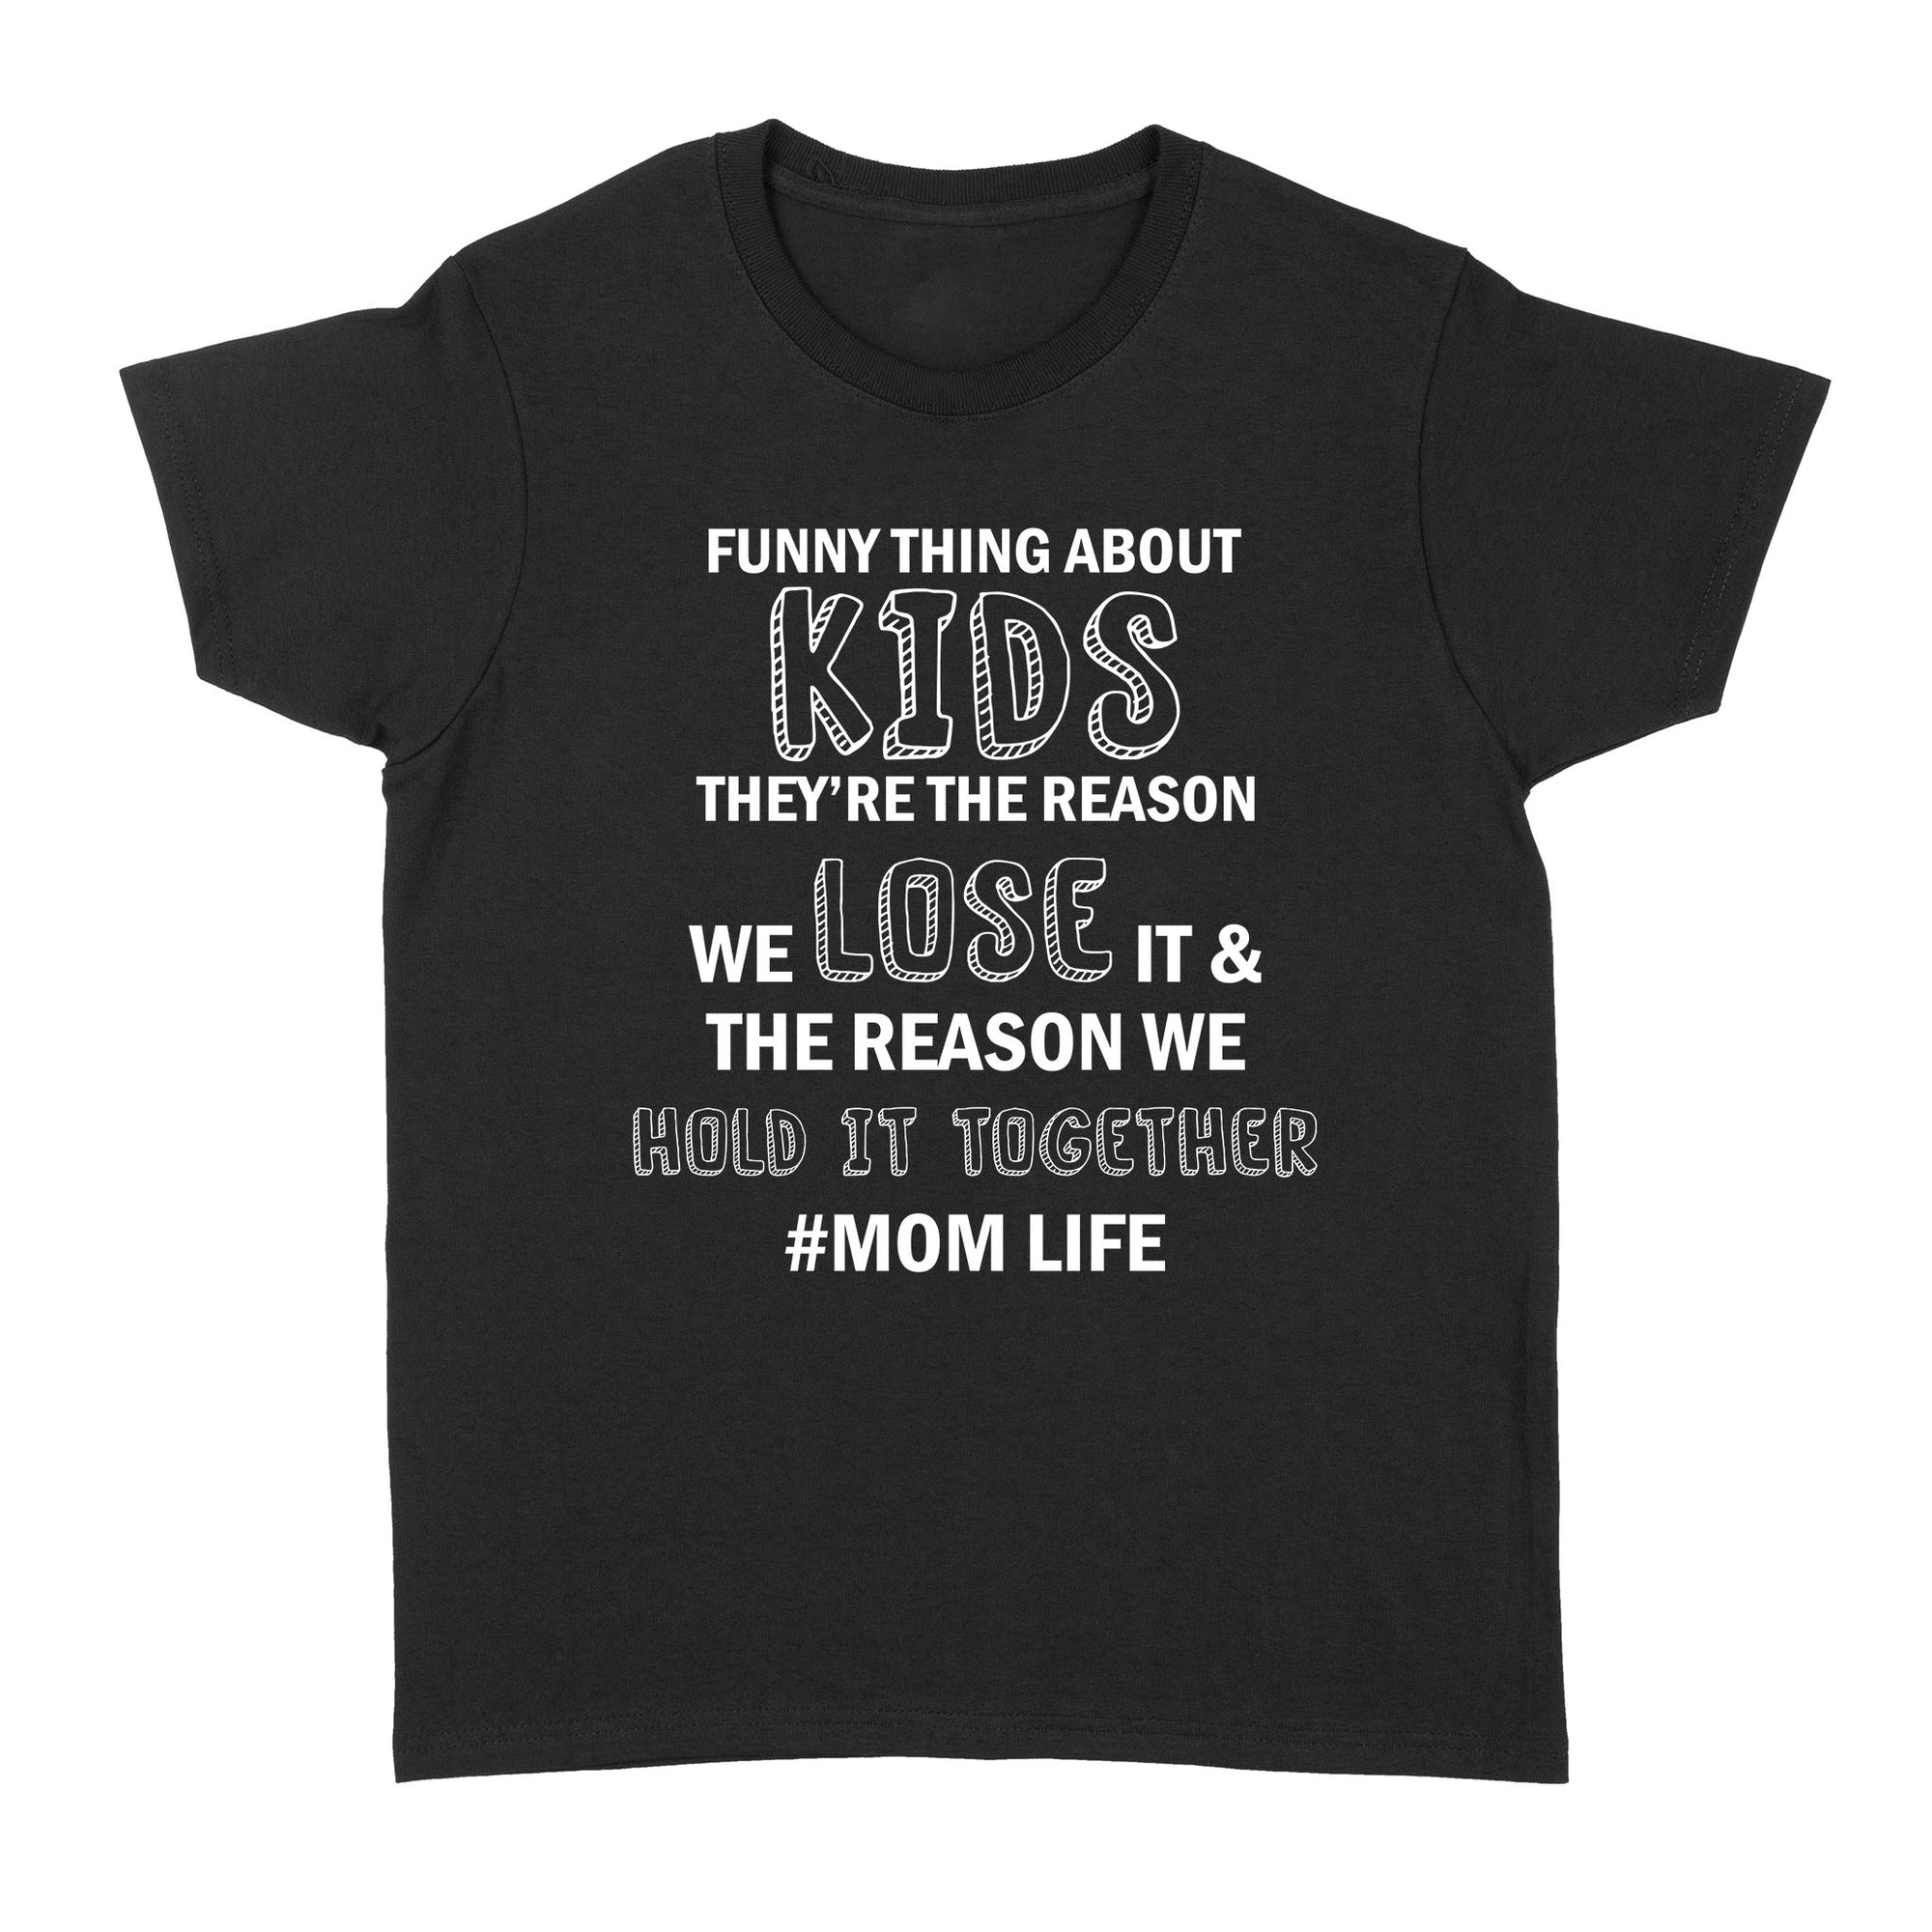 Gift Ideas for Mom Mothers Day Funny Thing About Kids They're The Reason We Lose It The Reason Momlife Standard Women's T-shirt